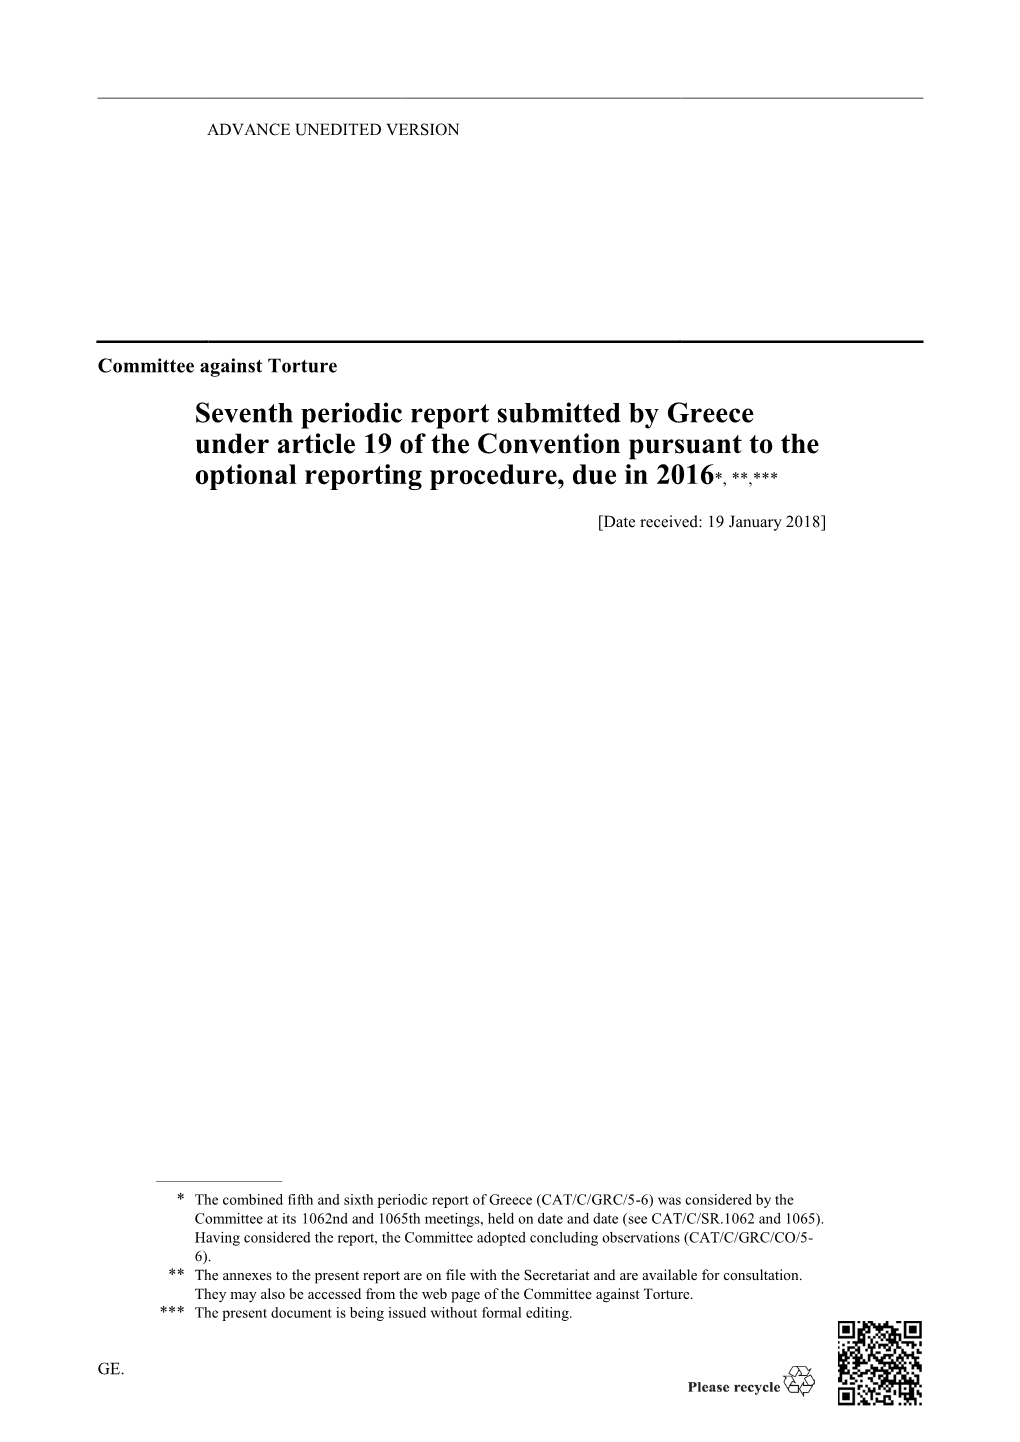 Seventh Periodic Report Submitted by Greece Under Article 19 of the Convention Pursuant to The